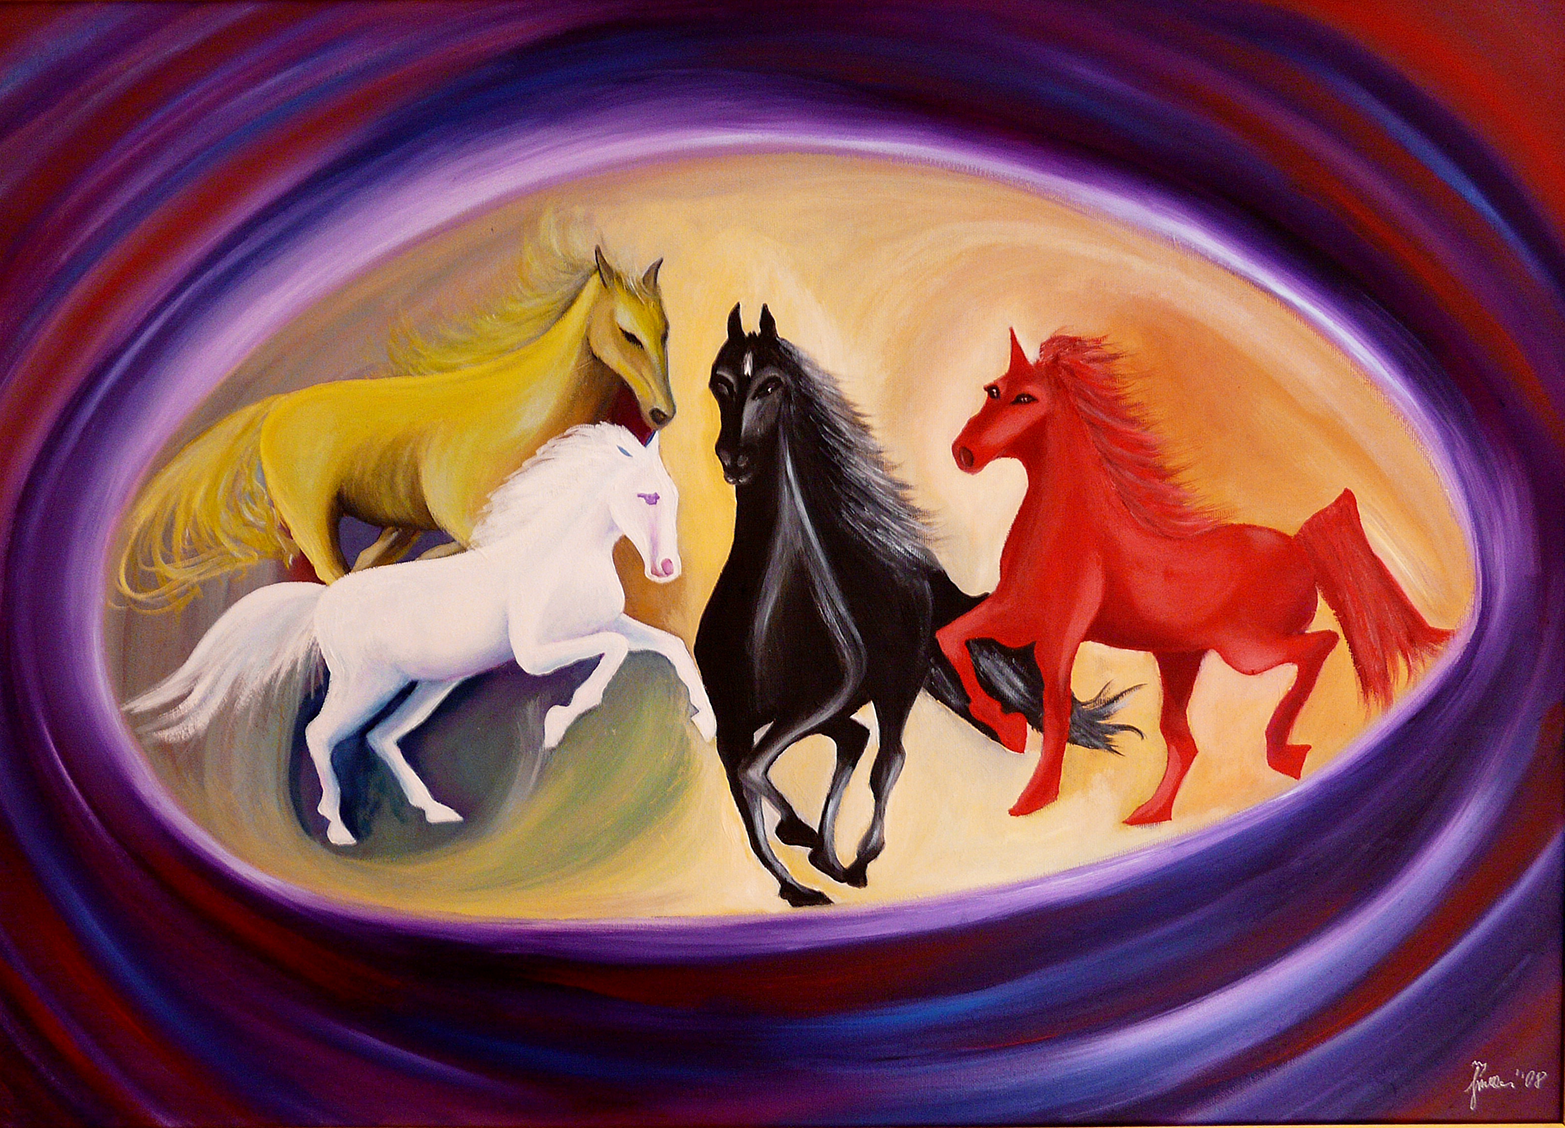 Horses (Paint inspired by poetry by Giulia Occorsio)